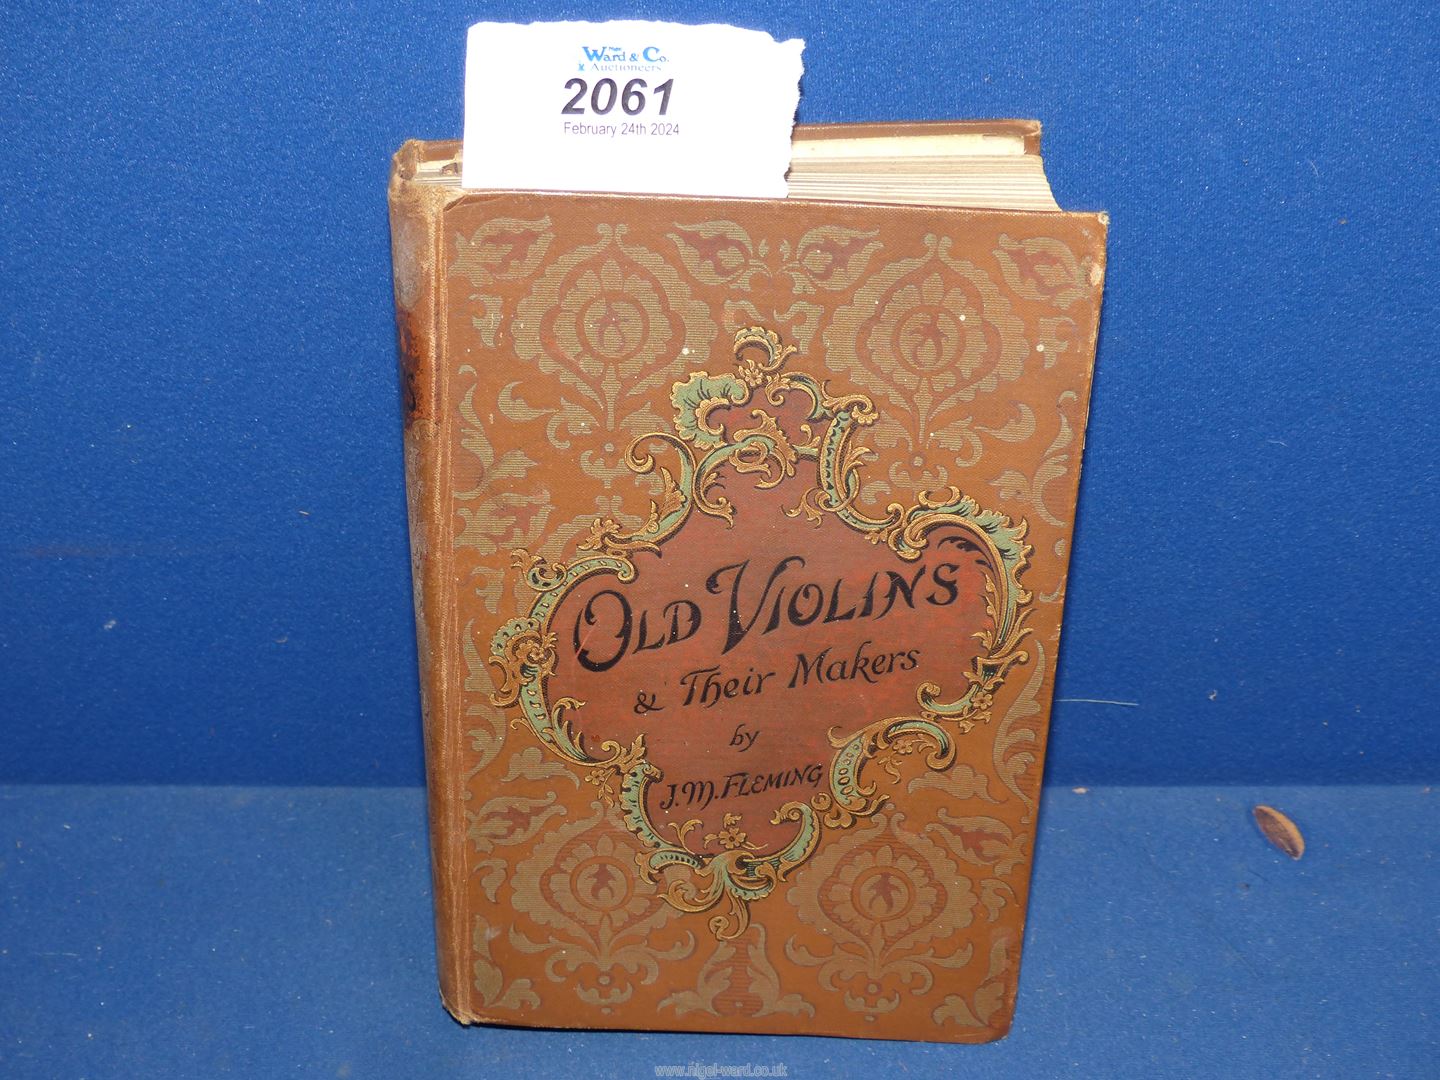 Old Violins and their Makers by James M. Fleming printed by L. Upcott Gill, 170 Strand W.C.